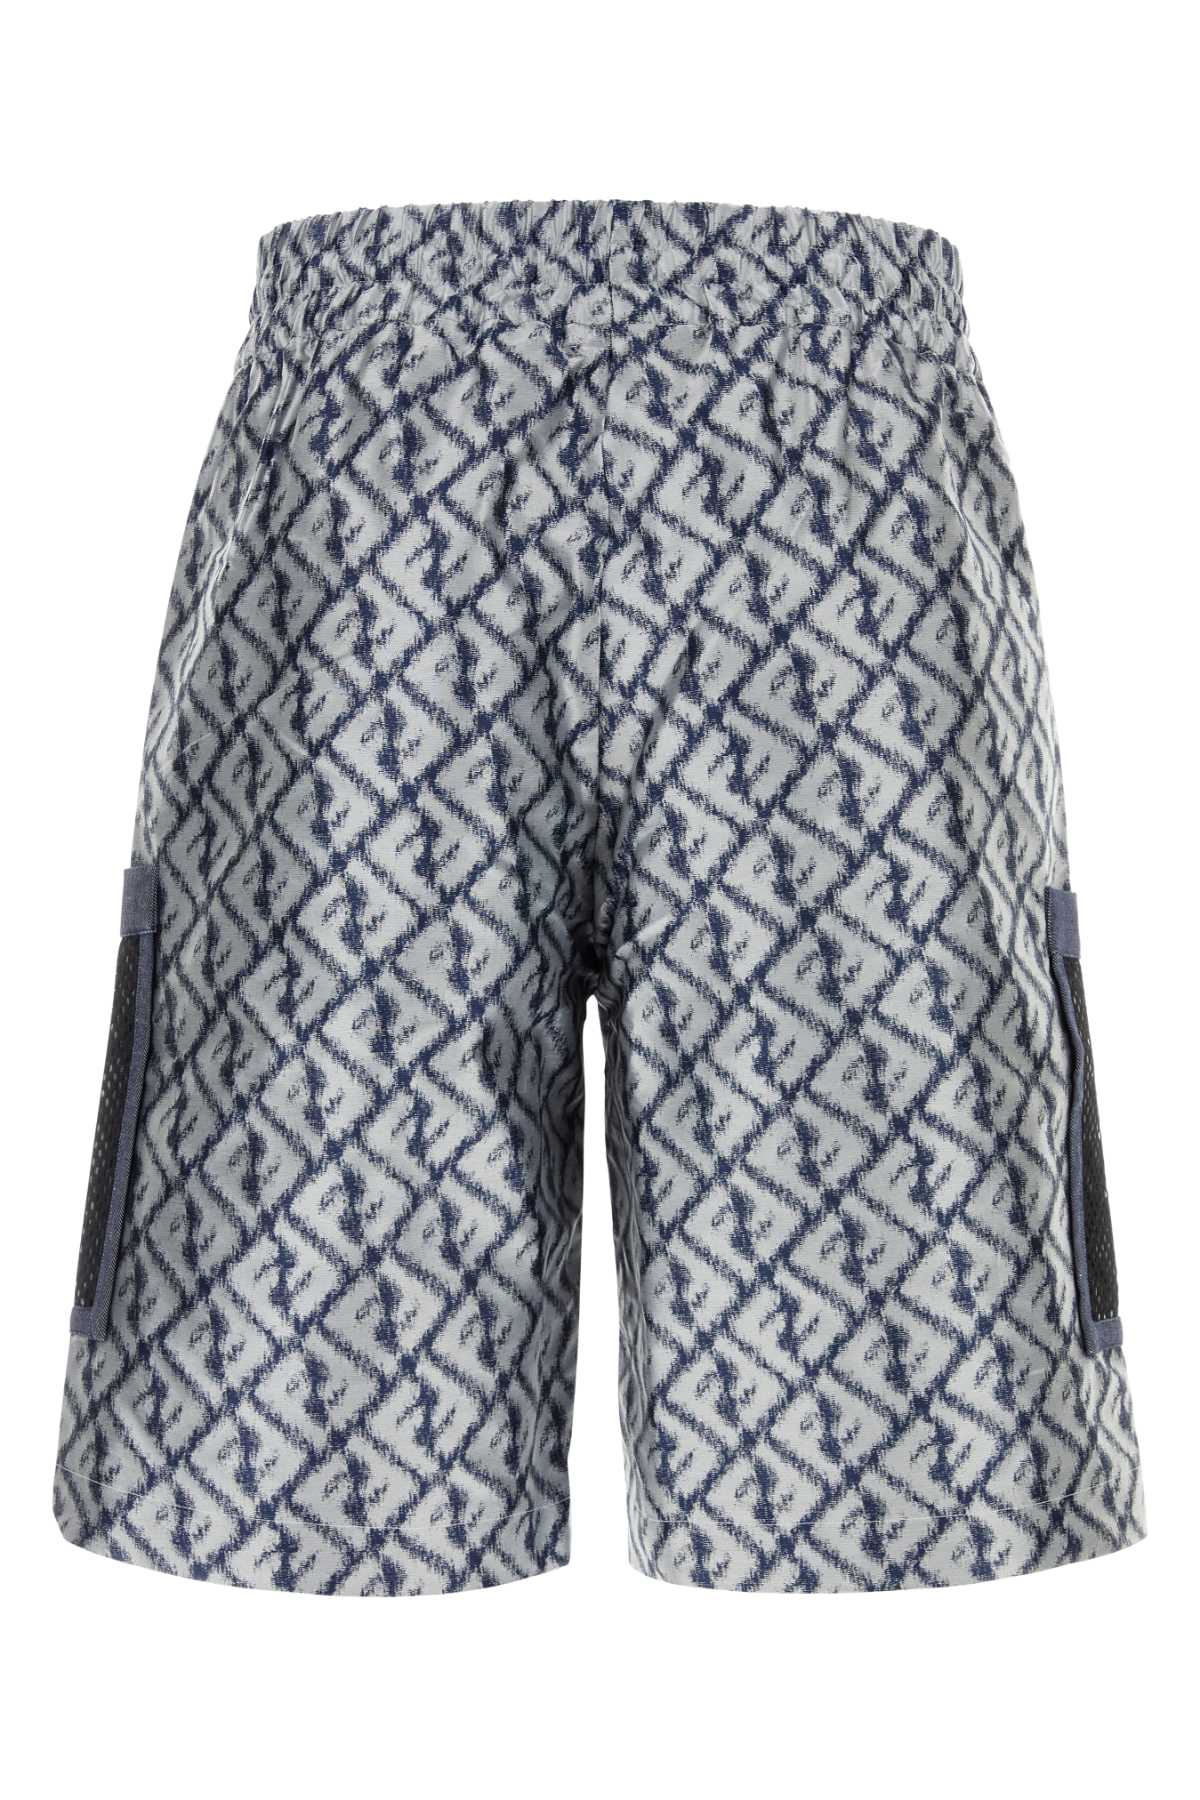 Fendi Embroidered Polyester Bermuda Shorts In F1krn